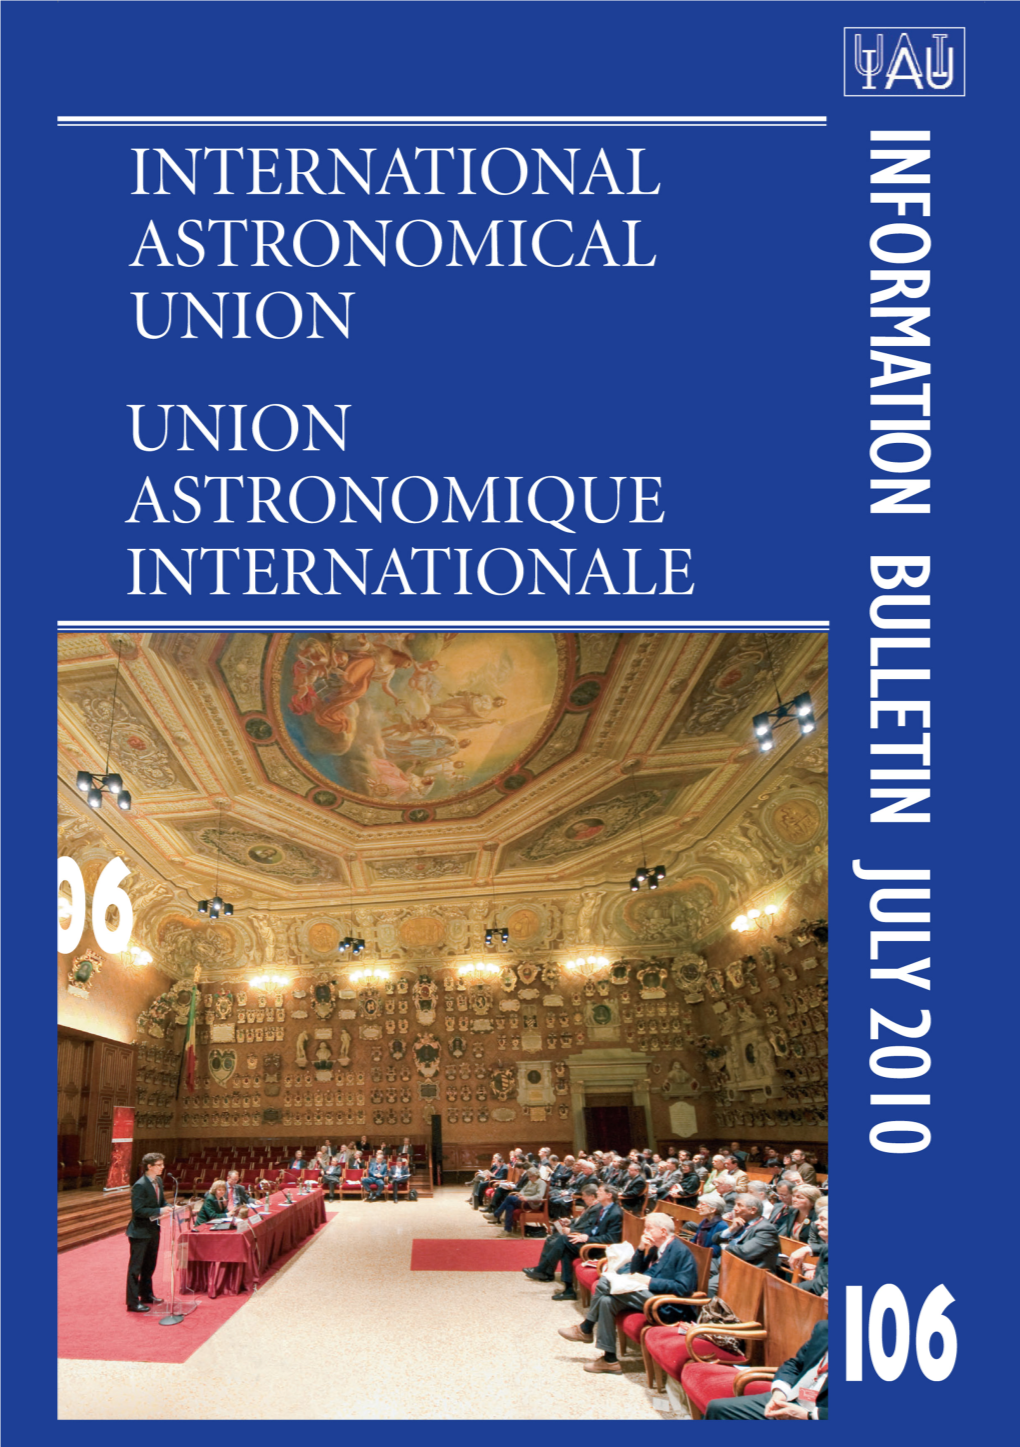 Links with Astronomy Groups and Organisations at Home and Abroad